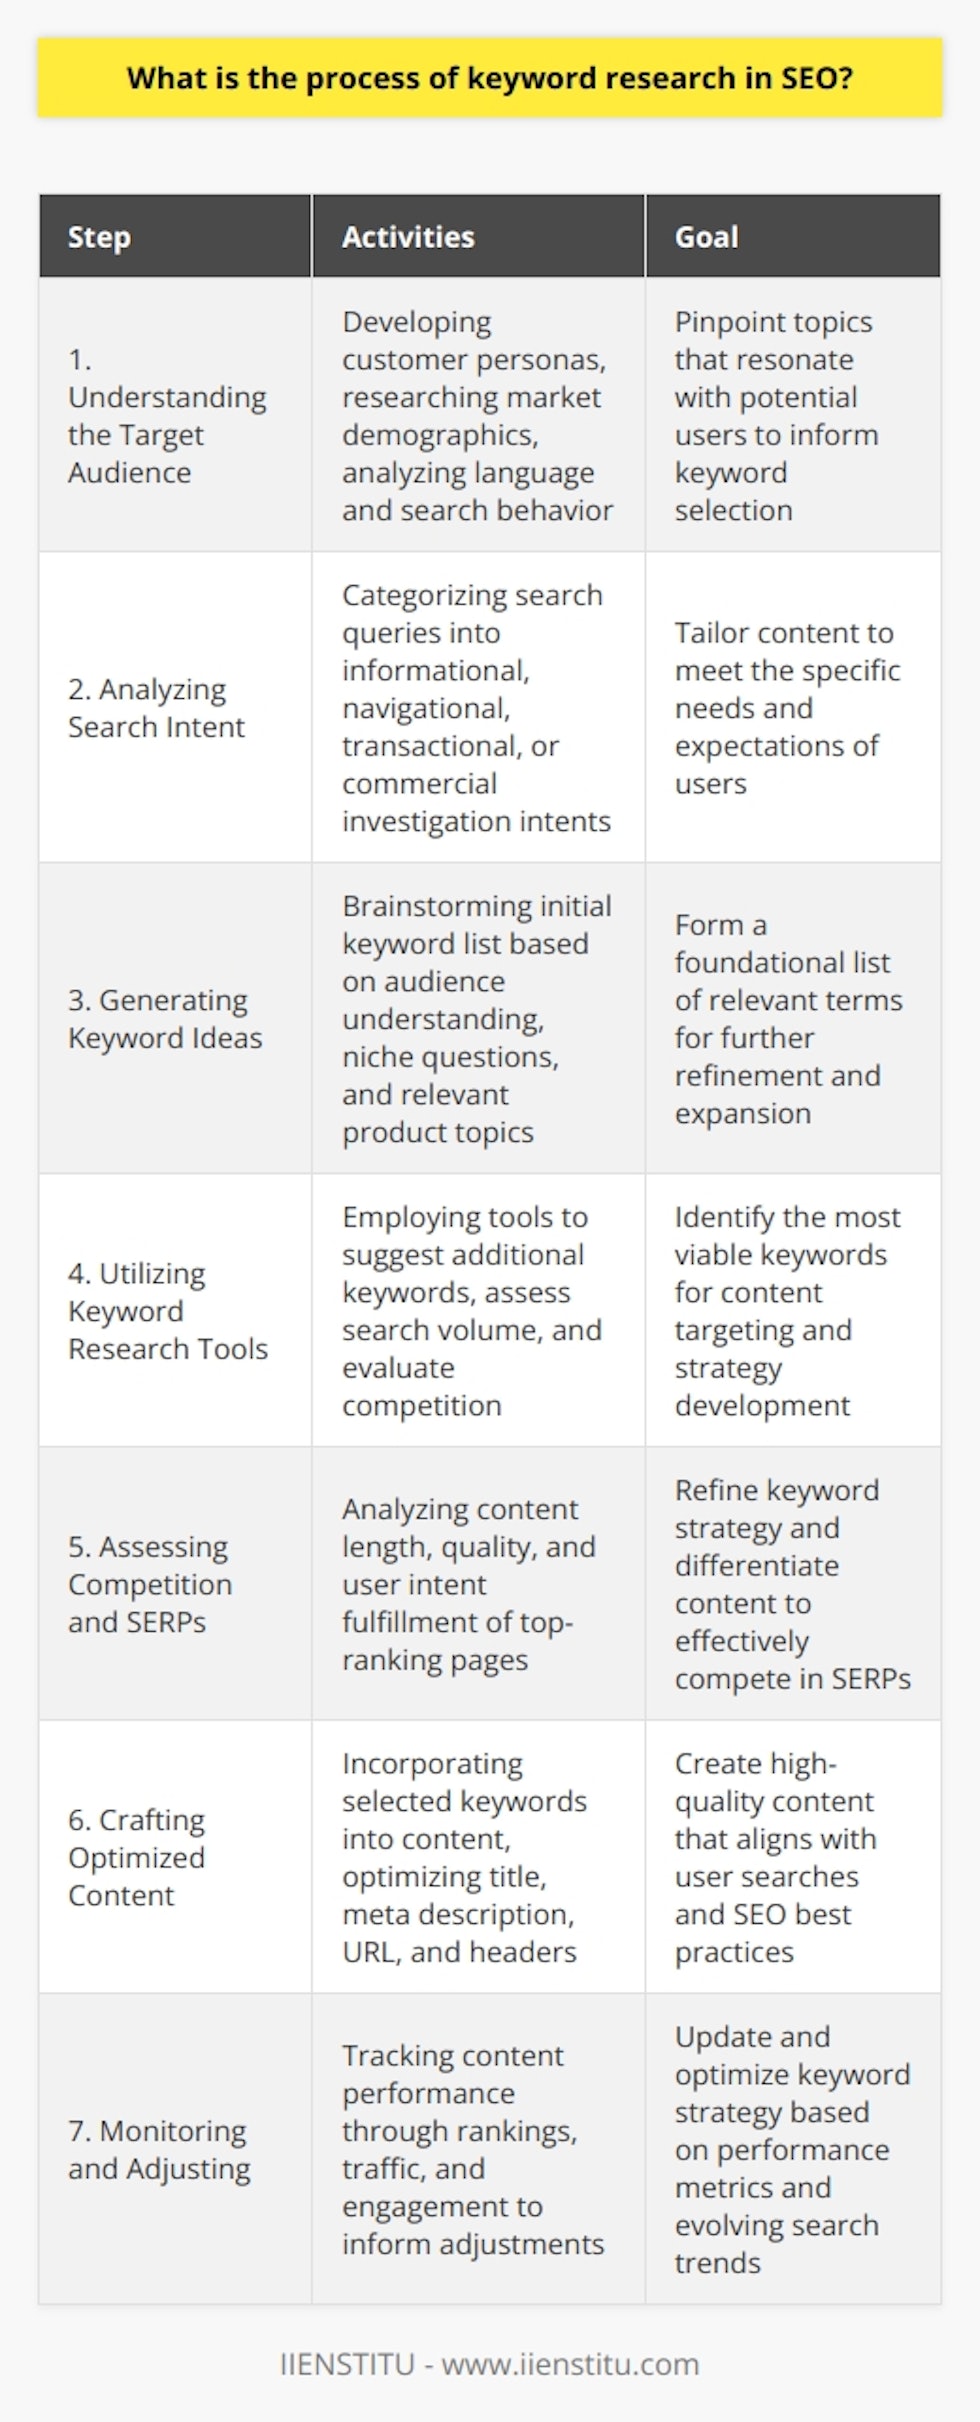 Keyword research in SEO is the foundational process of uncovering the specific terms and phrases that your target audience uses in search engines, with the goal of optimizing content to align with those terms and improve visibility in search engine results pages (SERPs). Here is a breakdown of the process:**1. Understanding the Target Audience:**Successful keyword research starts with a deep understanding of the target audience. This includes garnering insights into their demographic traits, search behavior, and the language they use. By developing customer personas and researching the market, you can pinpoint the topics of interest that resonate with your potential users.**2. Analyzing Search Intent:**Search intent refers to the purpose that leads someone to perform a specific search query. It's categorized typically into informational, navigational, transactional, or commercial investigation intents. To tailor your content accurately, identifying the intent behind the keywords is crucial. This helps in creating content that meets the users' needs and expectations.**3. Generating Keyword Ideas:**In this phase, you braindump potential keywords or phrases you believe people might use to find your content. These ideas could be derived from your understanding of the audience, common questions asked in your niche, or topics surrounding your product or service. From this list, you'll refine and expand through research.**4. Utilizing Keyword Research Tools:**Keyword research tools are indispensable in the SEO keyword discovery process. By inputting your initial ideas, these tools can suggest additional keywords, provide data on search volume, and even give insight into the level of competition for each term. These resources can reveal the most viable keywords for targeting.**5. Assessing Competition and SERPs:**Understanding what you're up against can guide your keyword strategy. Analyze the top-ranking pages for your targeted keywords, taking note of their content length, quality, and how well they cater to the user intent. This not only helps in keyword selection but also in differentiating your content strategy effectively.**6. Crafting Optimized Content:**Once the best keywords are selected, they should be incorporated naturally into high-quality, informative content that matches user intent. Keywords should be used judiciously and integrated into key SEO elements such as the title, meta description, URL, and headers.**7. Monitoring and Adjusting:**Keyword research doesn't end with content creation. Monitoring the performance of your content by tracking your rankings, traffic, and user engagement indicators is vital. This ongoing analysis will reveal which keywords are performing well and which may need a strategy adjustment or further optimization.Remember, keyword research is not a set-it-and-forget-it task, but a recurring part of SEO strategy. Keep abreast of trends and changes in search behavior to maintain the relevance and effectiveness of your targeted keywords. As search algorithms and user behavior evolve, so should your approach to keyword research and content optimization to sustain top SERP rankings and connect with your audience.